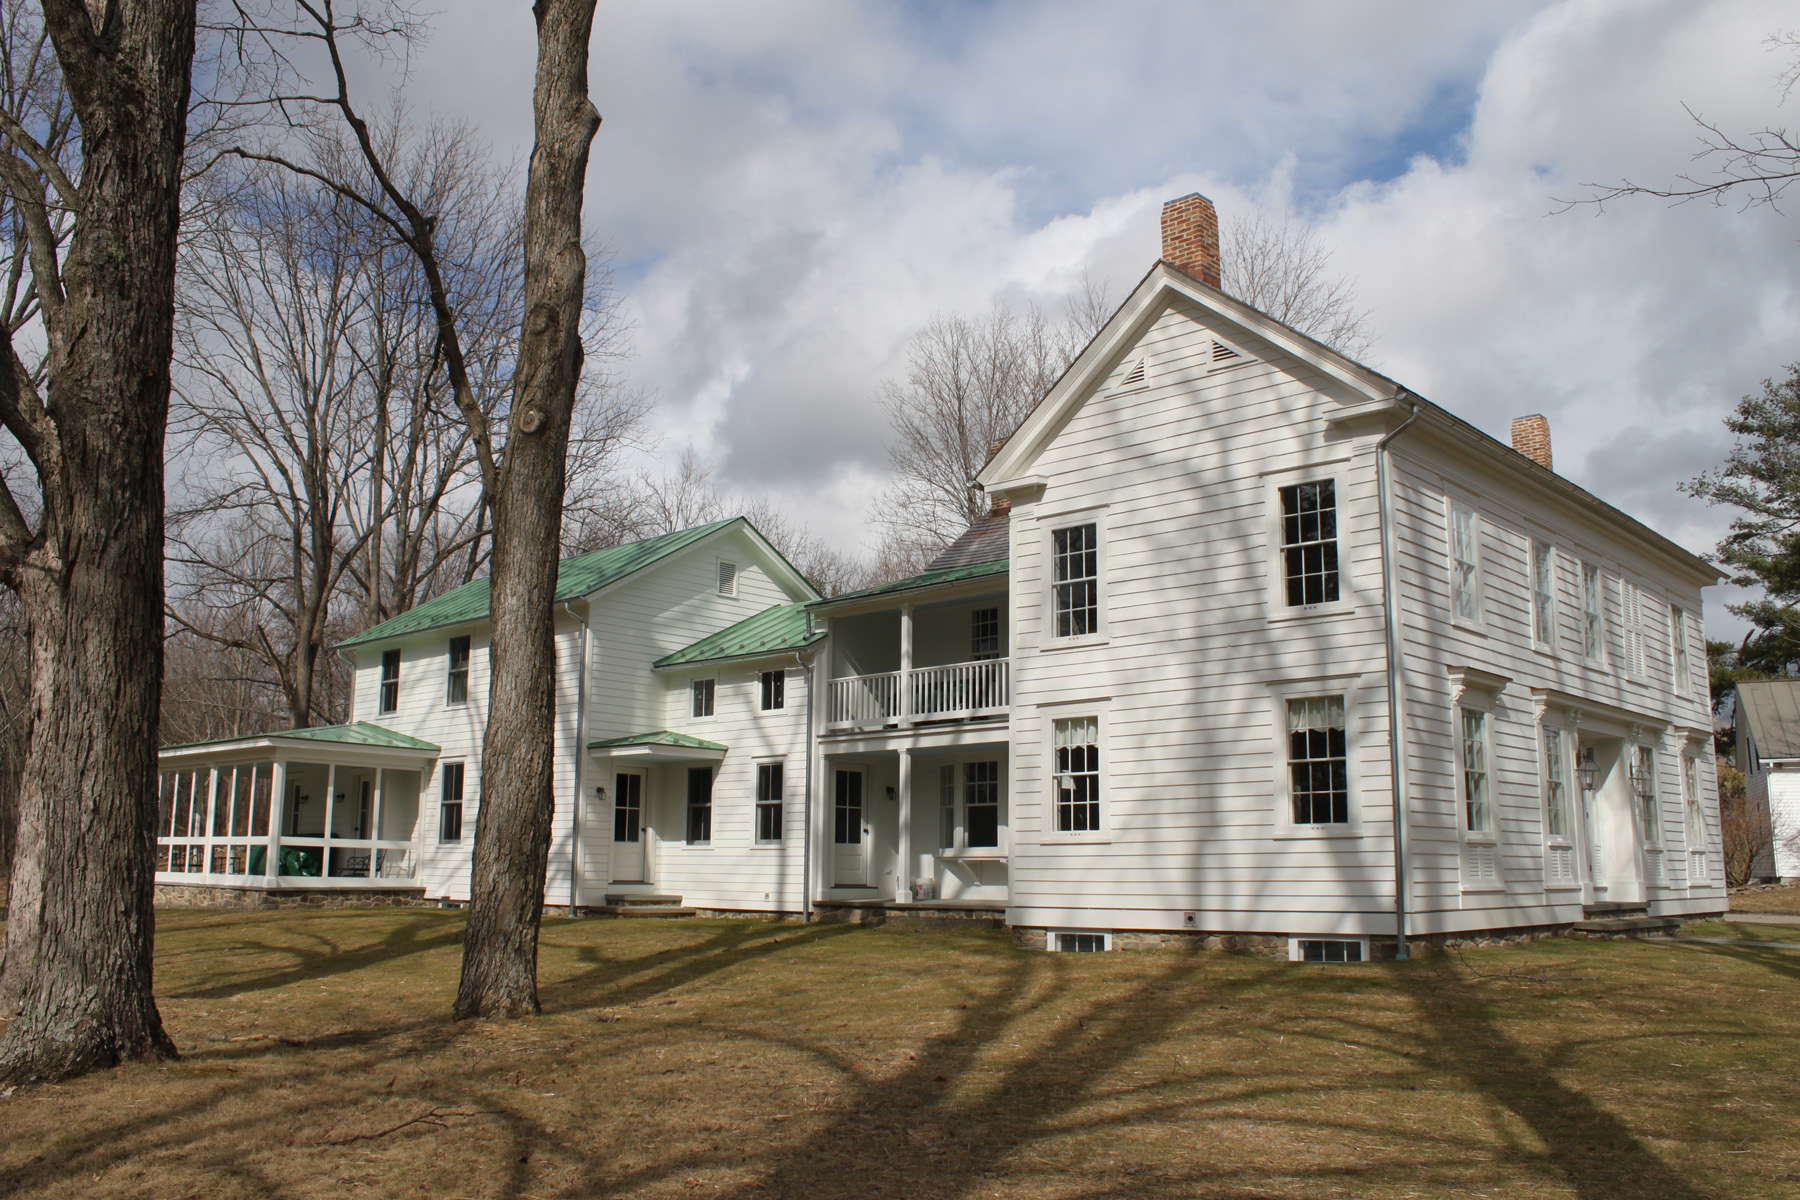 New Concord B&B opened in 2017